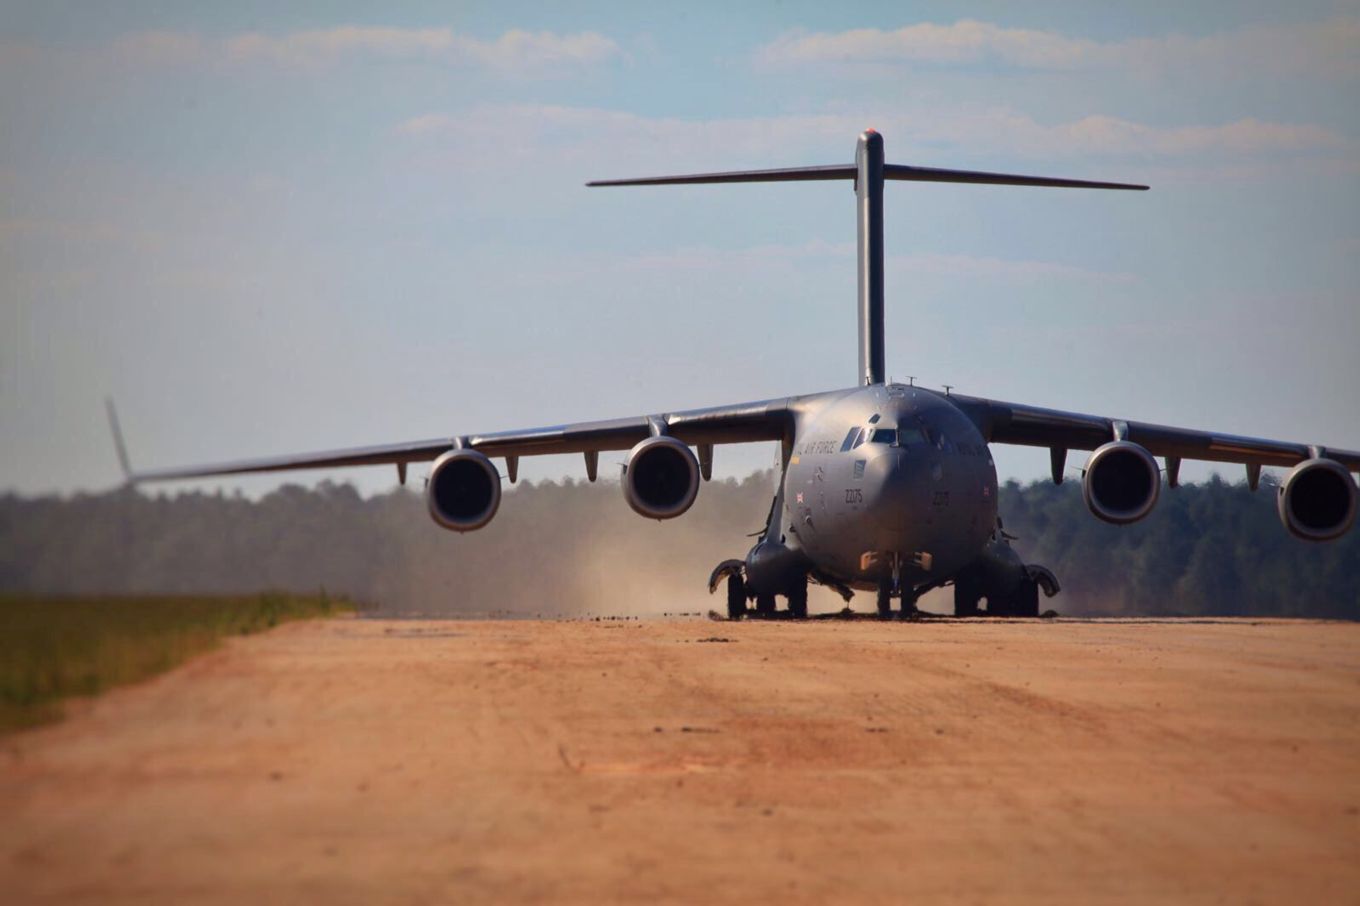 99 Squadron took the next step in developing the aircraft’s Semi Prepared Runway Operations (SPRO) capability during training based in Louisiana, USA